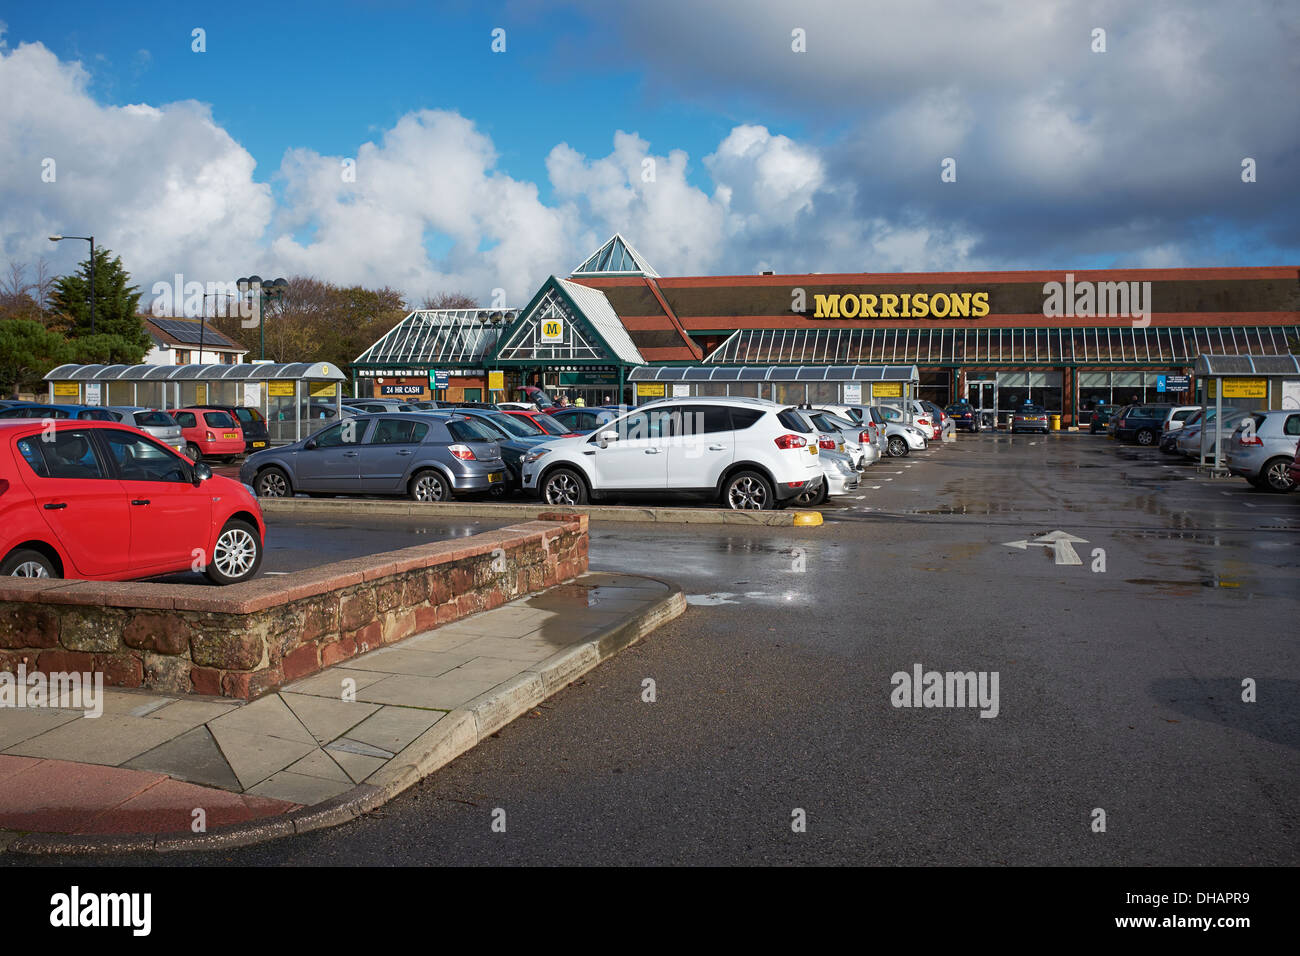 A Morrisons supermarket and car park in West Kirby on the Wirral UK Stock Photo